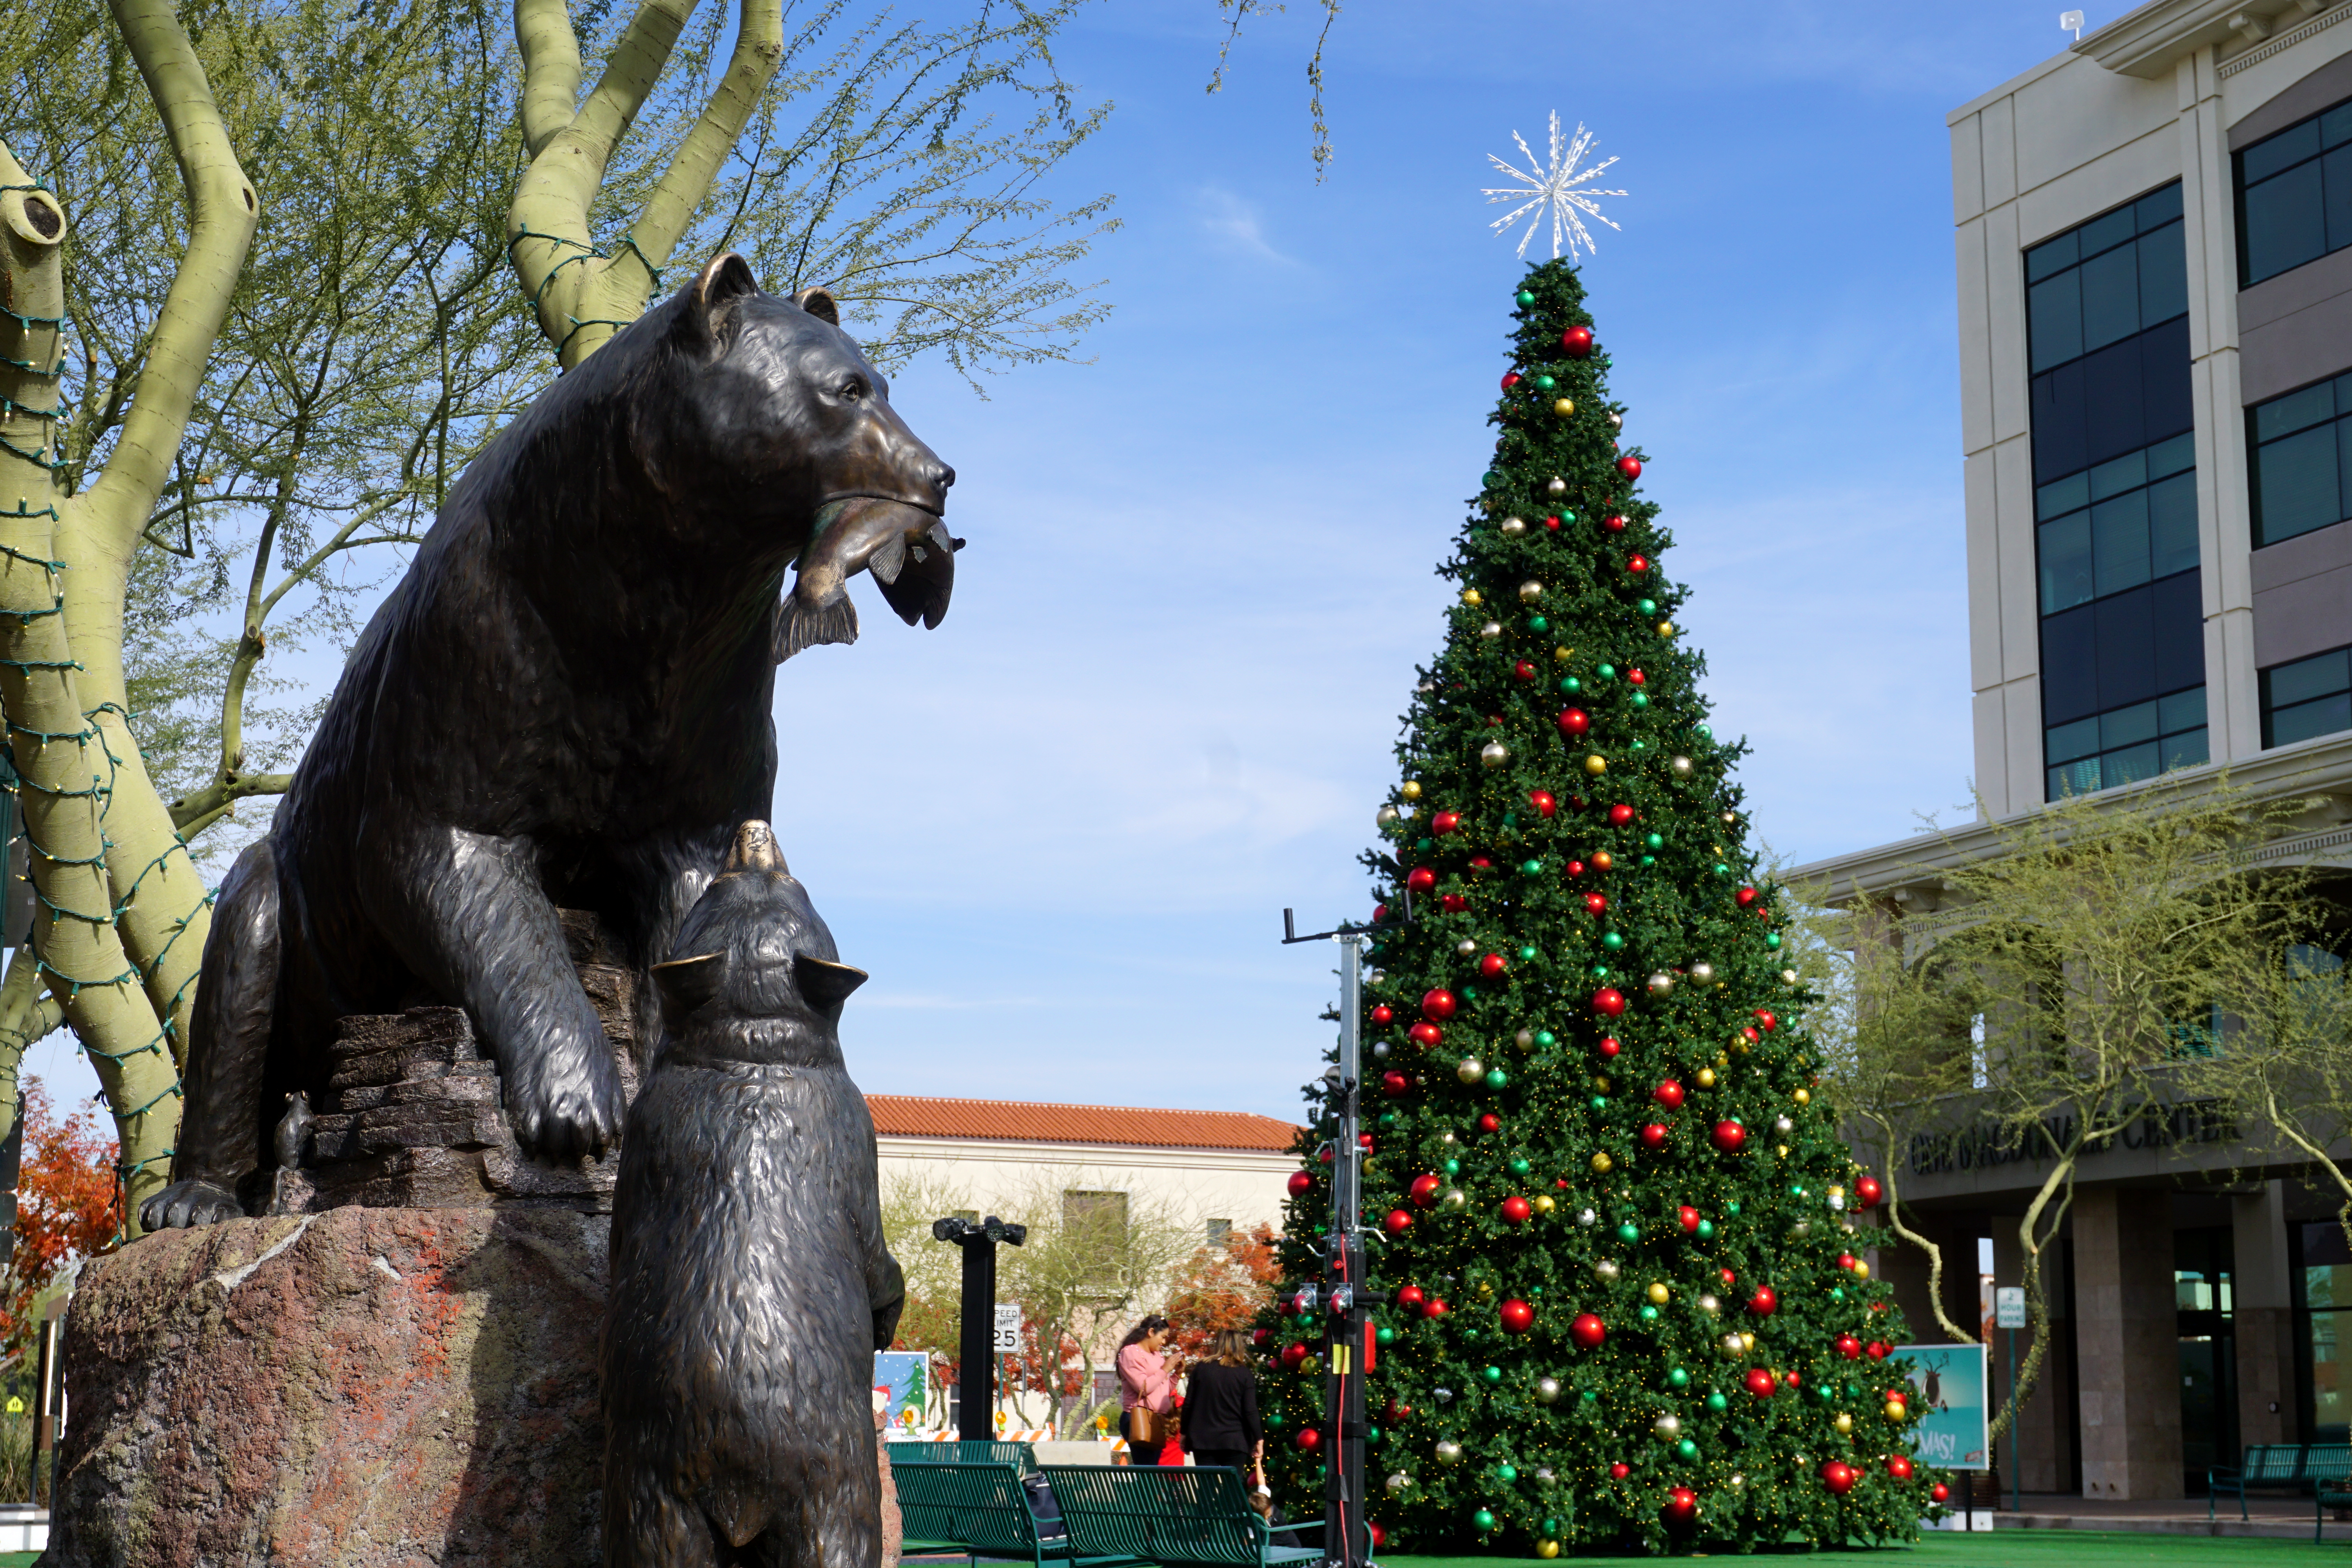 City of Mesa continues Merry Main Street with safety in mind